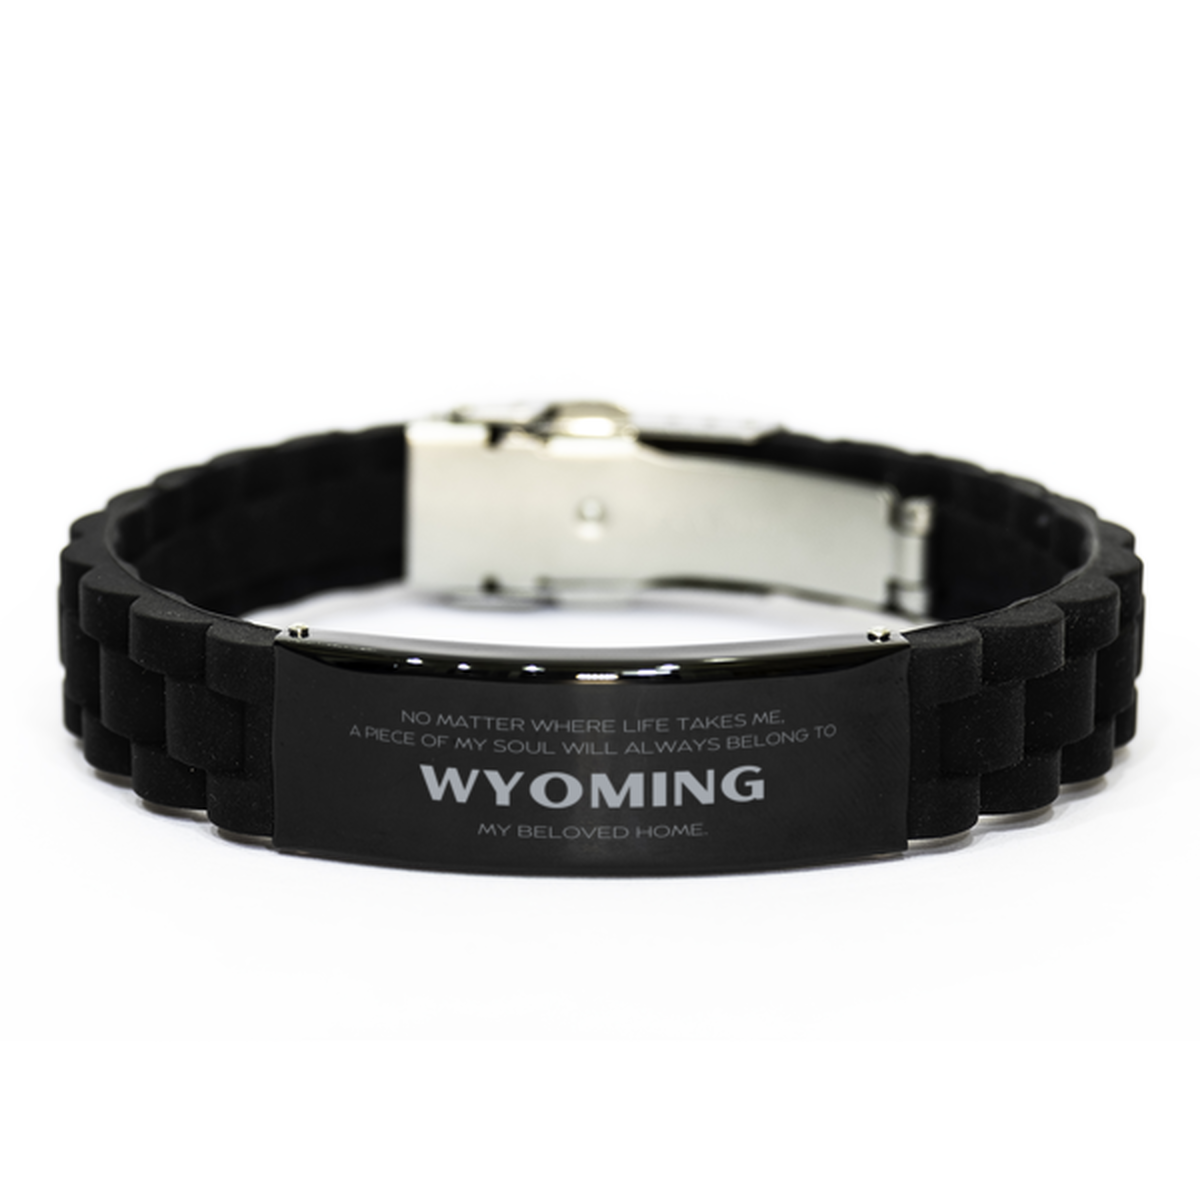 Love Wyoming State Gifts, My soul will always belong to Wyoming, Proud Black Glidelock Clasp Bracelet, Birthday Unique Gifts For Wyoming Men, Women, Friends